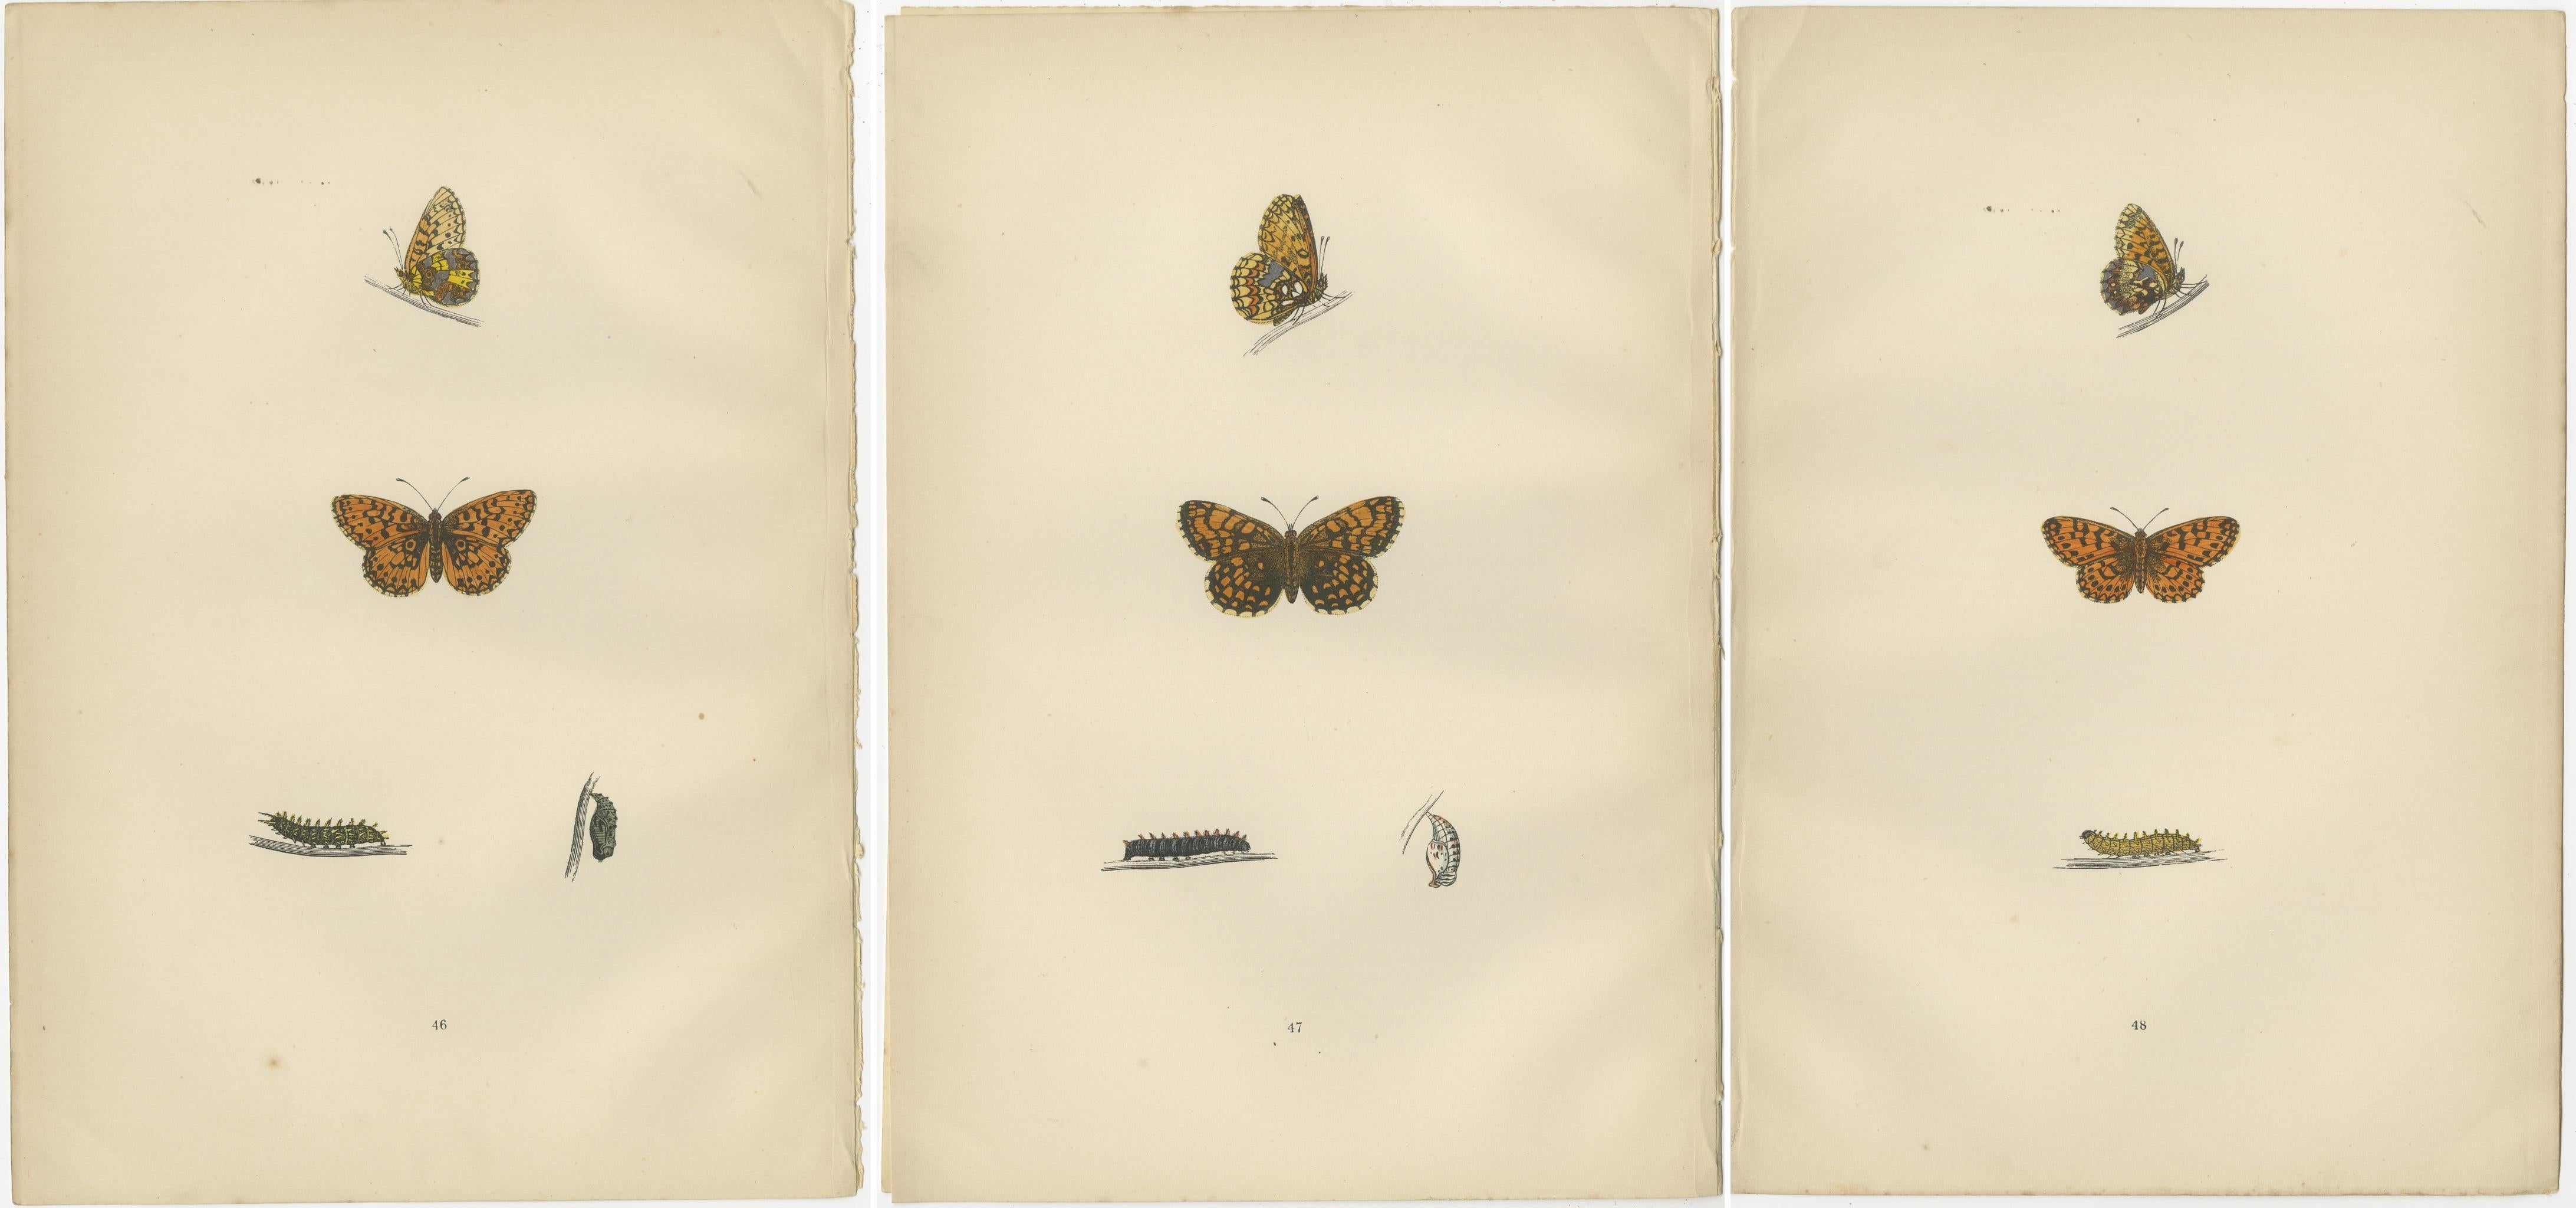 Paper Flight of Patterns: The Fritillary Trilogy from Morris's 1890 Masterpiece For Sale